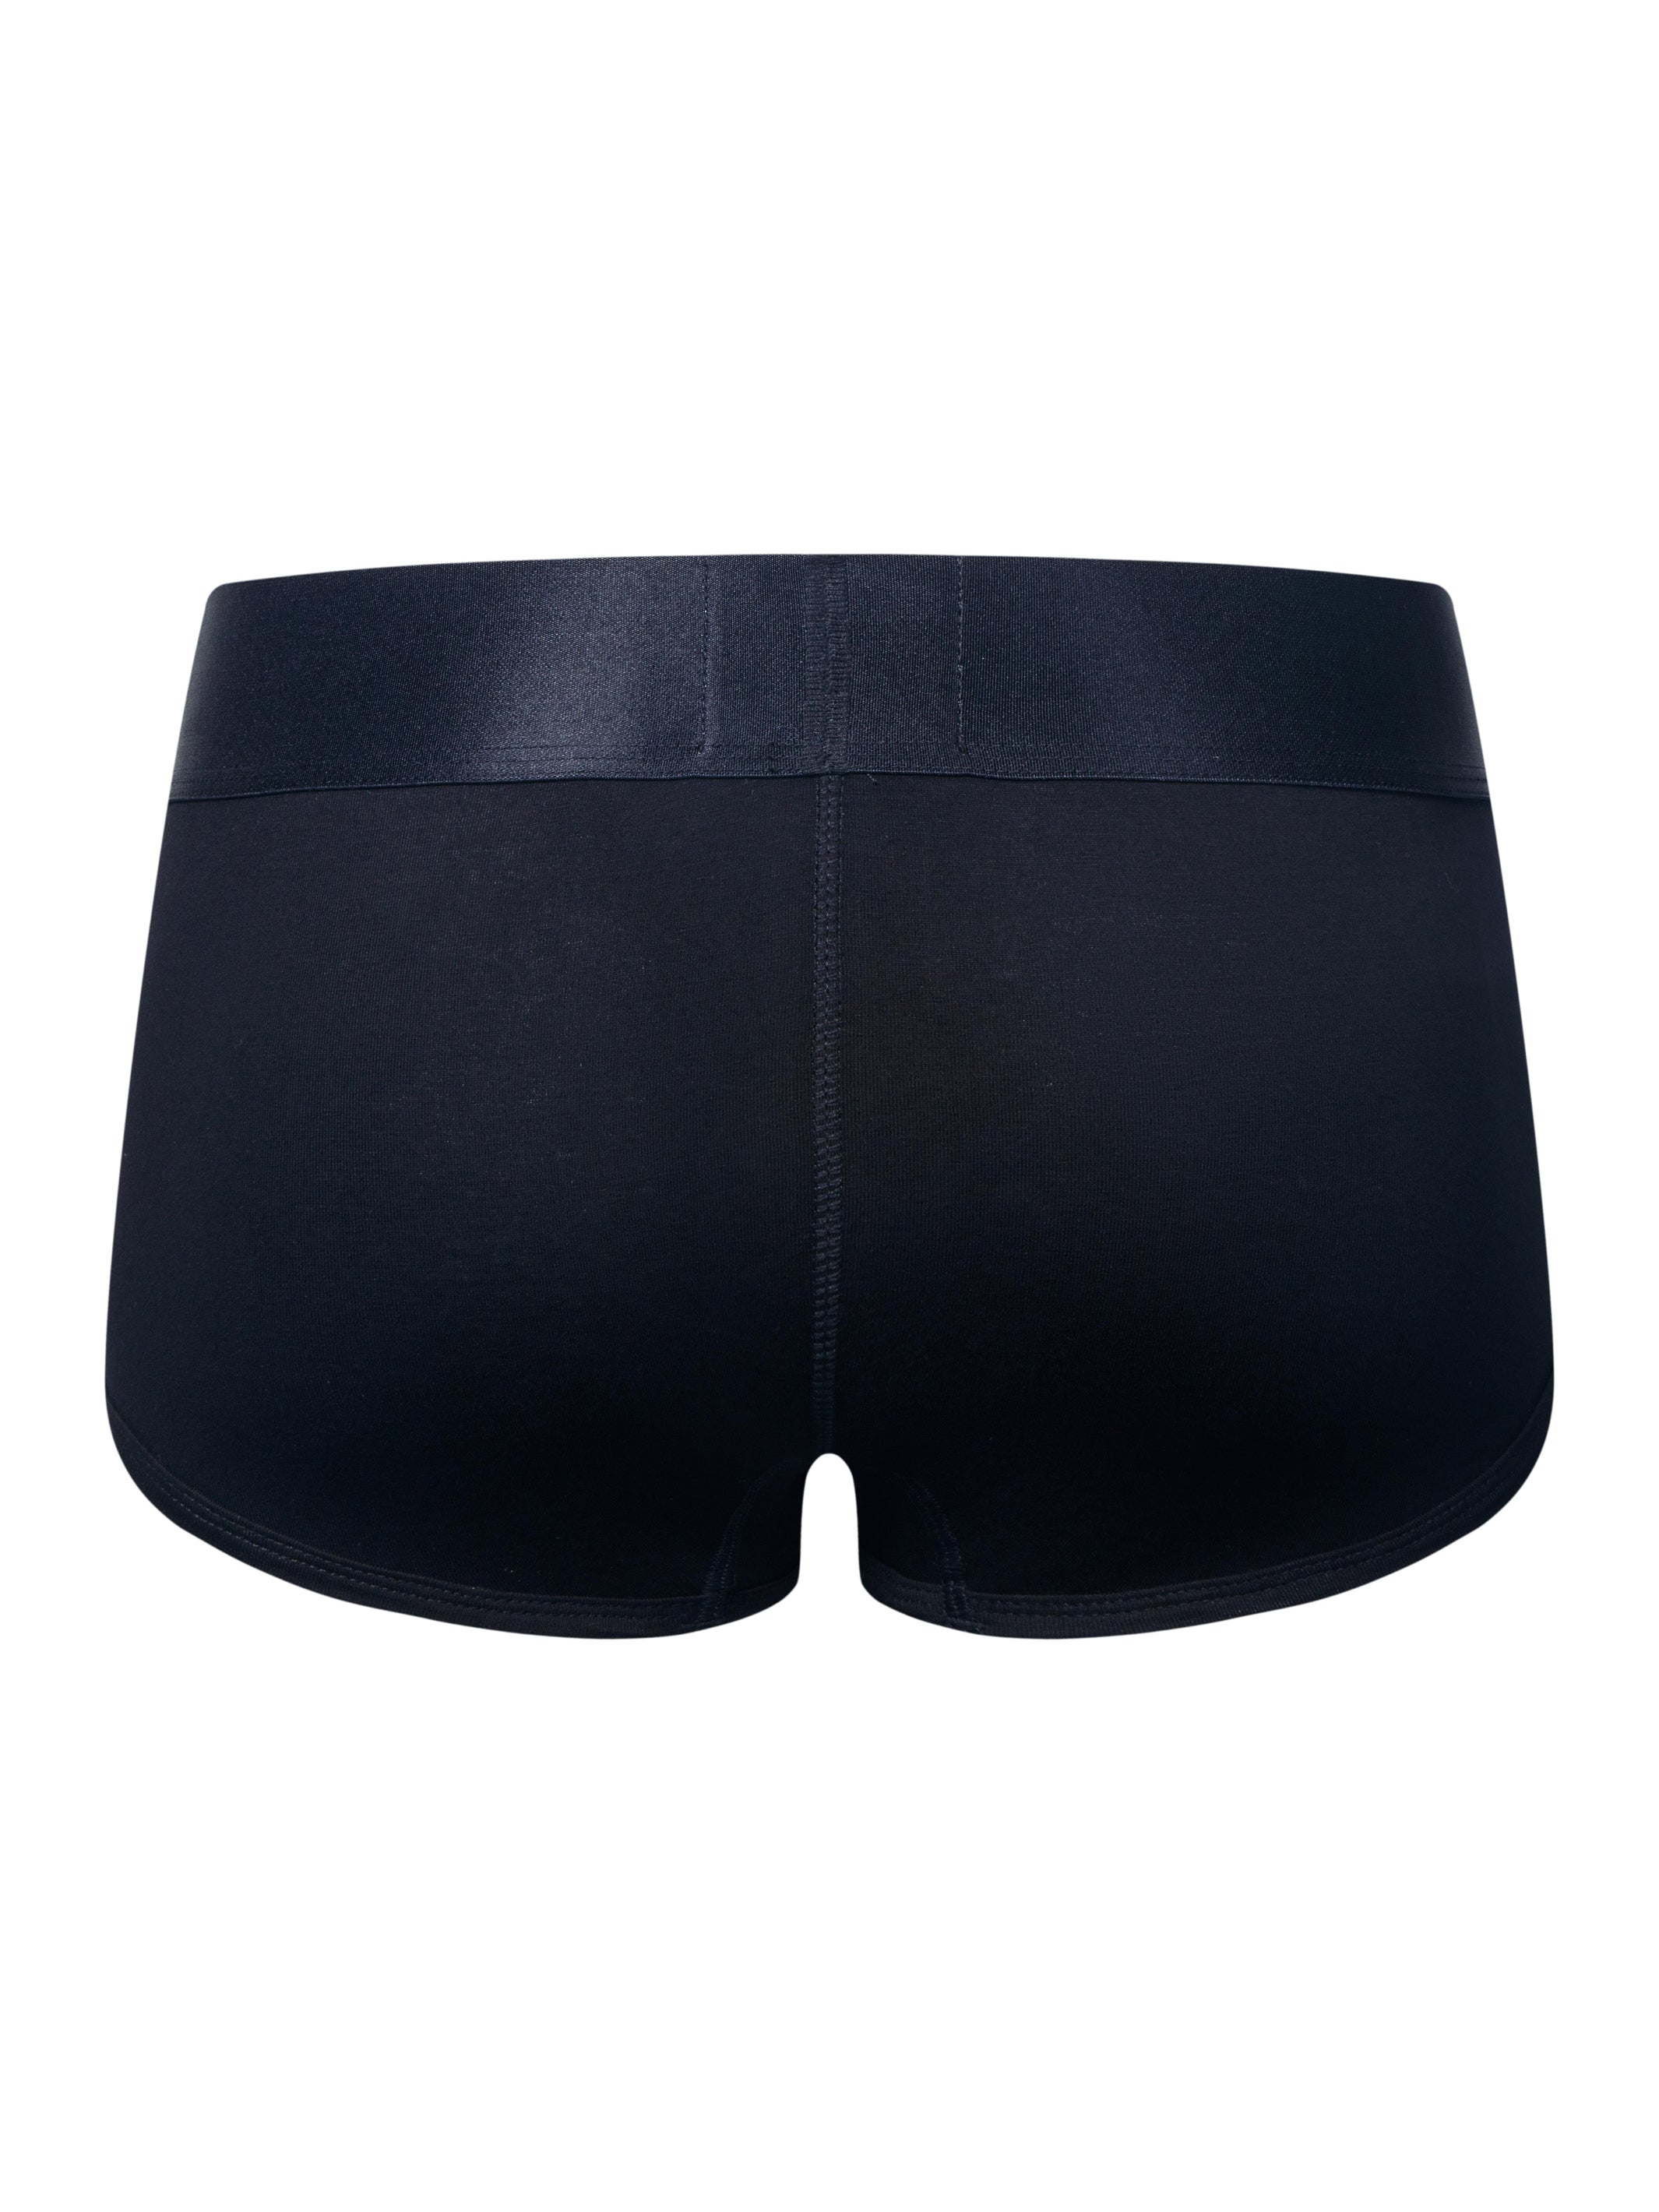 A product photo of a Black Phantom Boxer taken from behind.